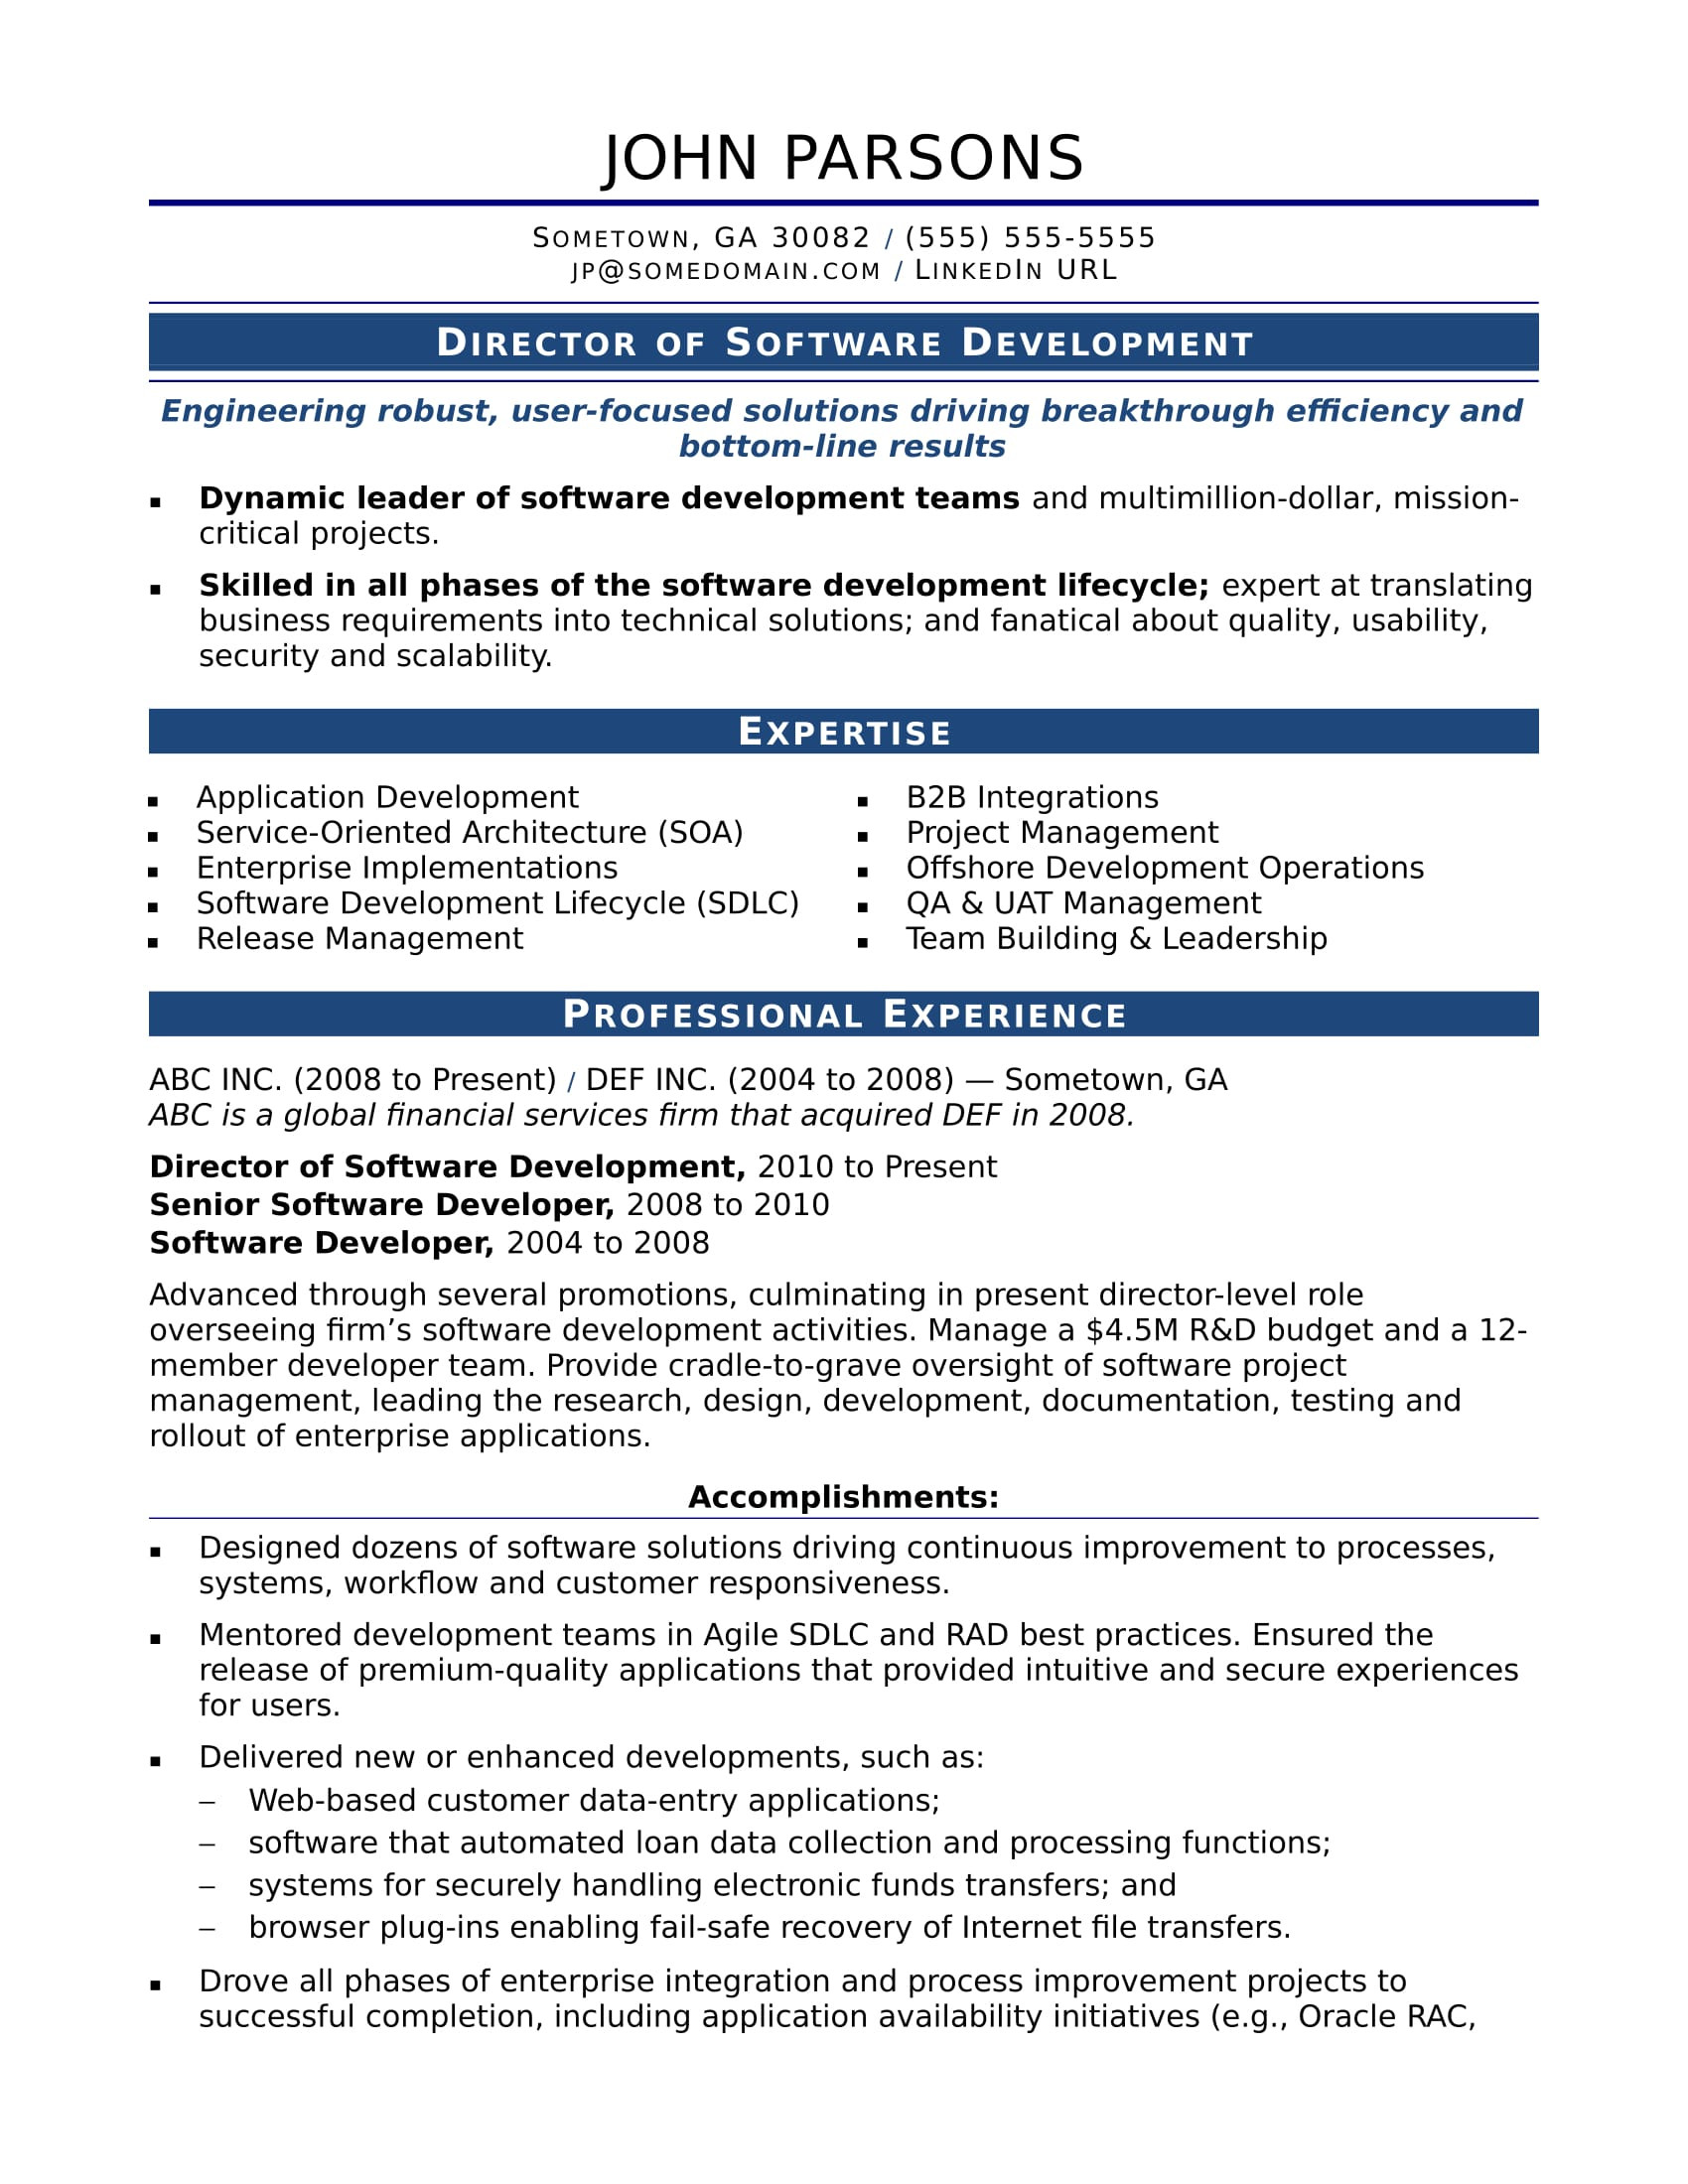 Resume Samples for Experienced Engineering Professionals Sample Resume for An Experienced It Developer Monster.com